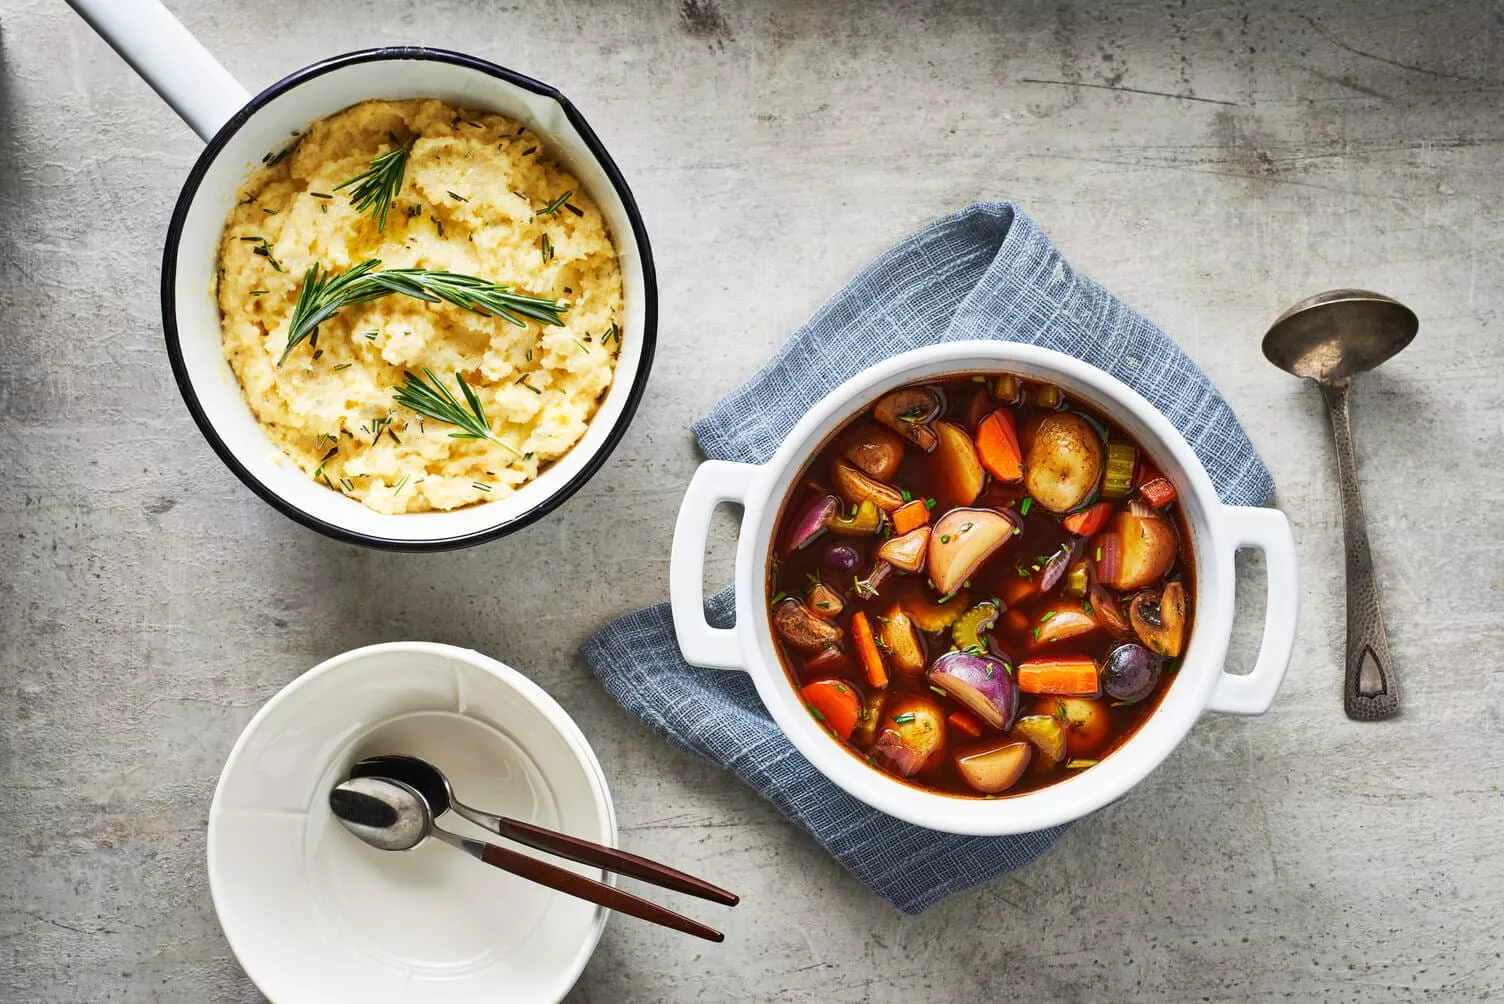 A delicious bowl of slow cooker veggie stew with polenta on the side.